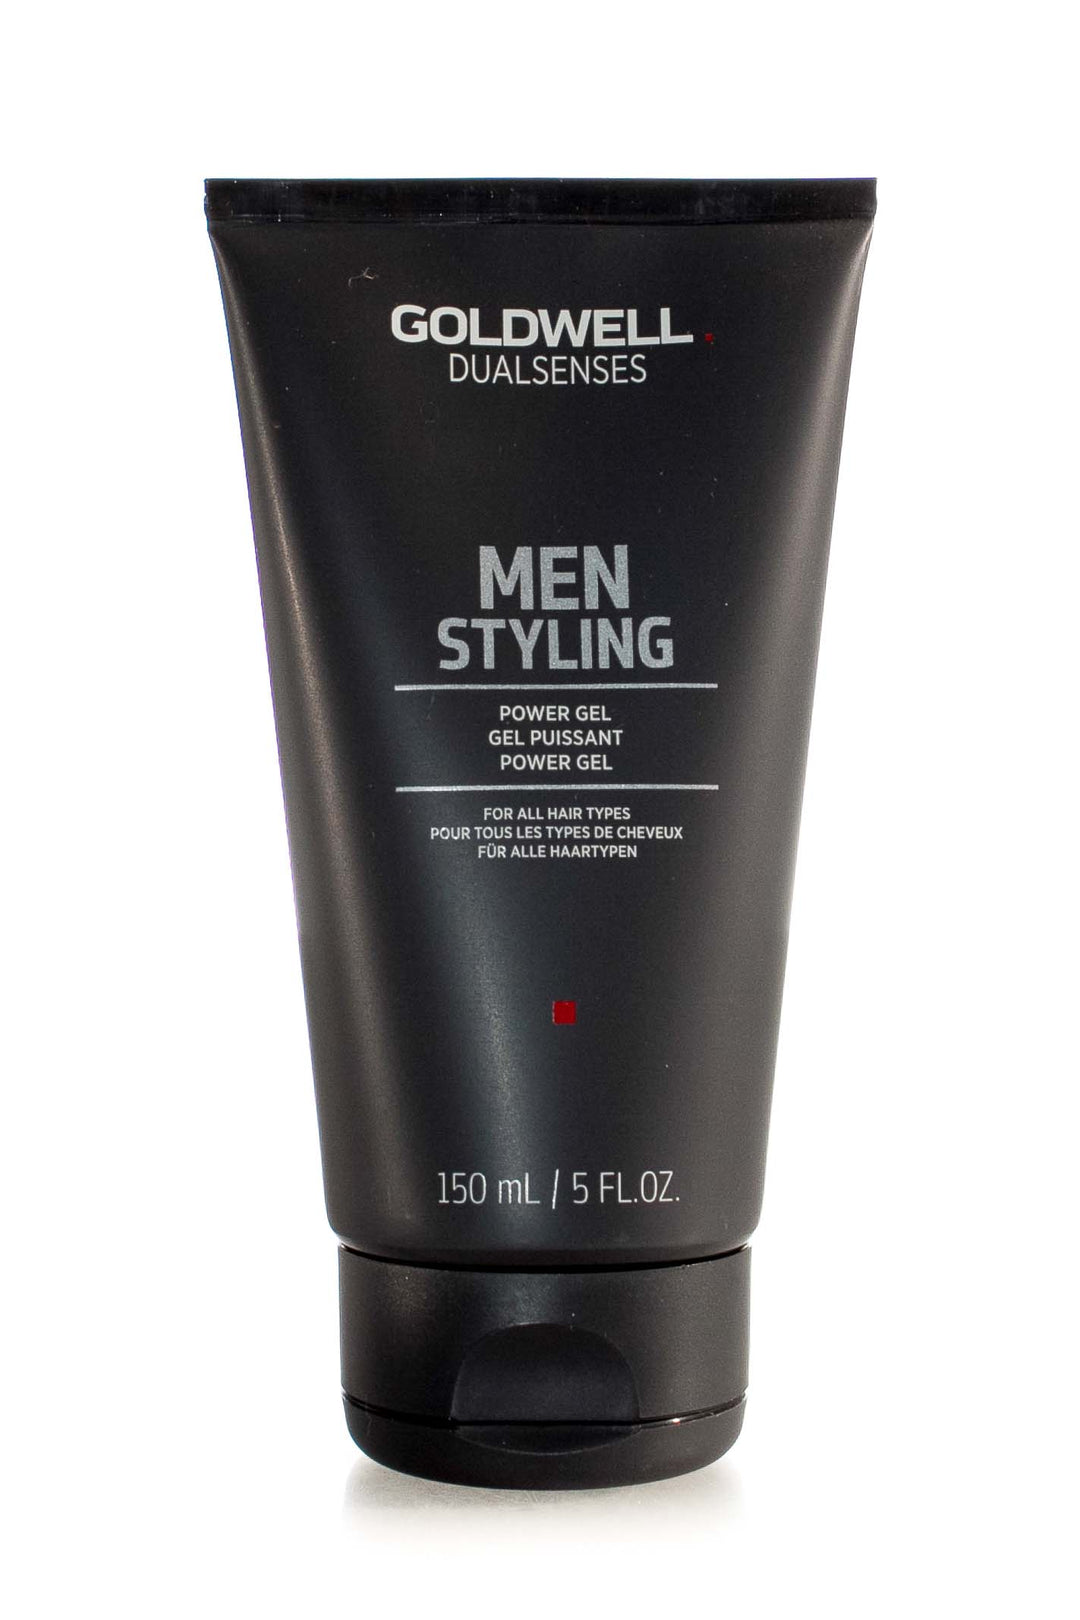 Product Image: Goldwell Men Styling Power Gel - 150ml